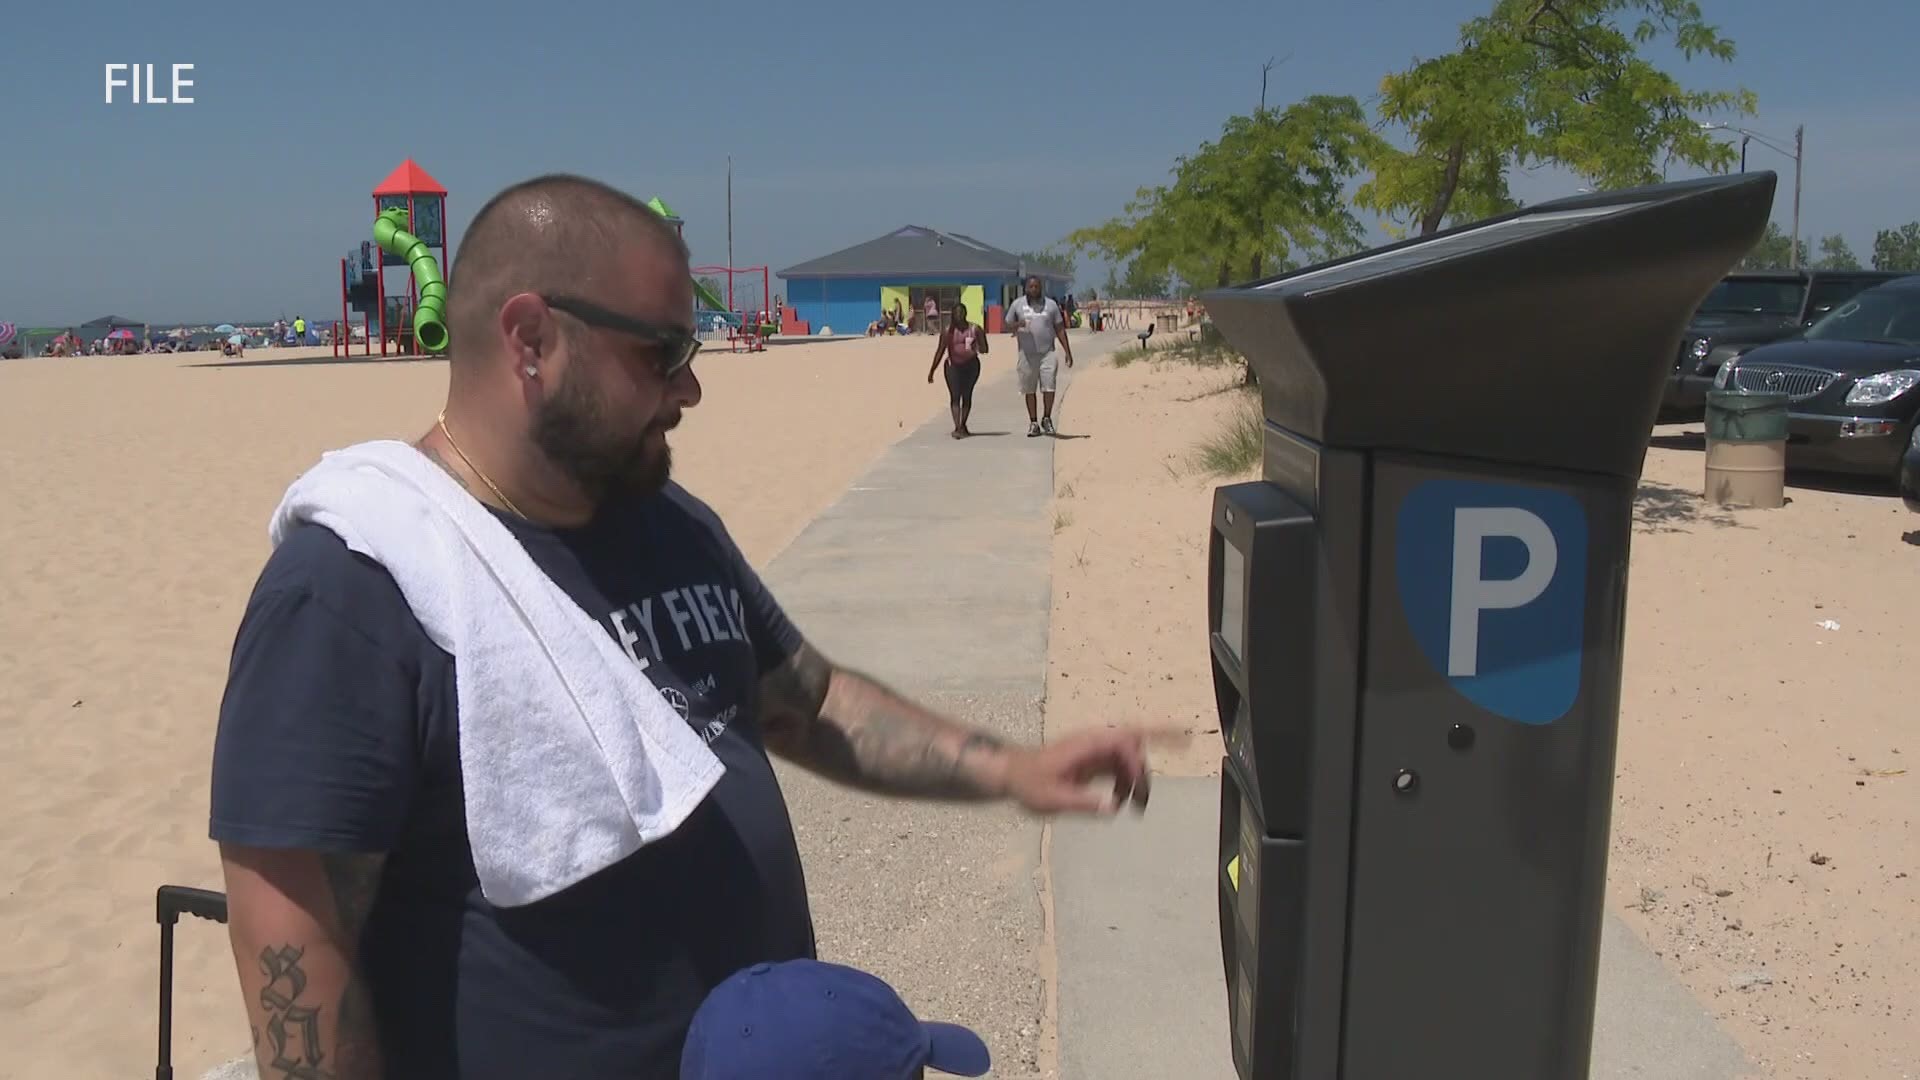 Residents in the City of Muskegon have until April 30, 2021 to pick up parking passes for Pere Marquette Beach.